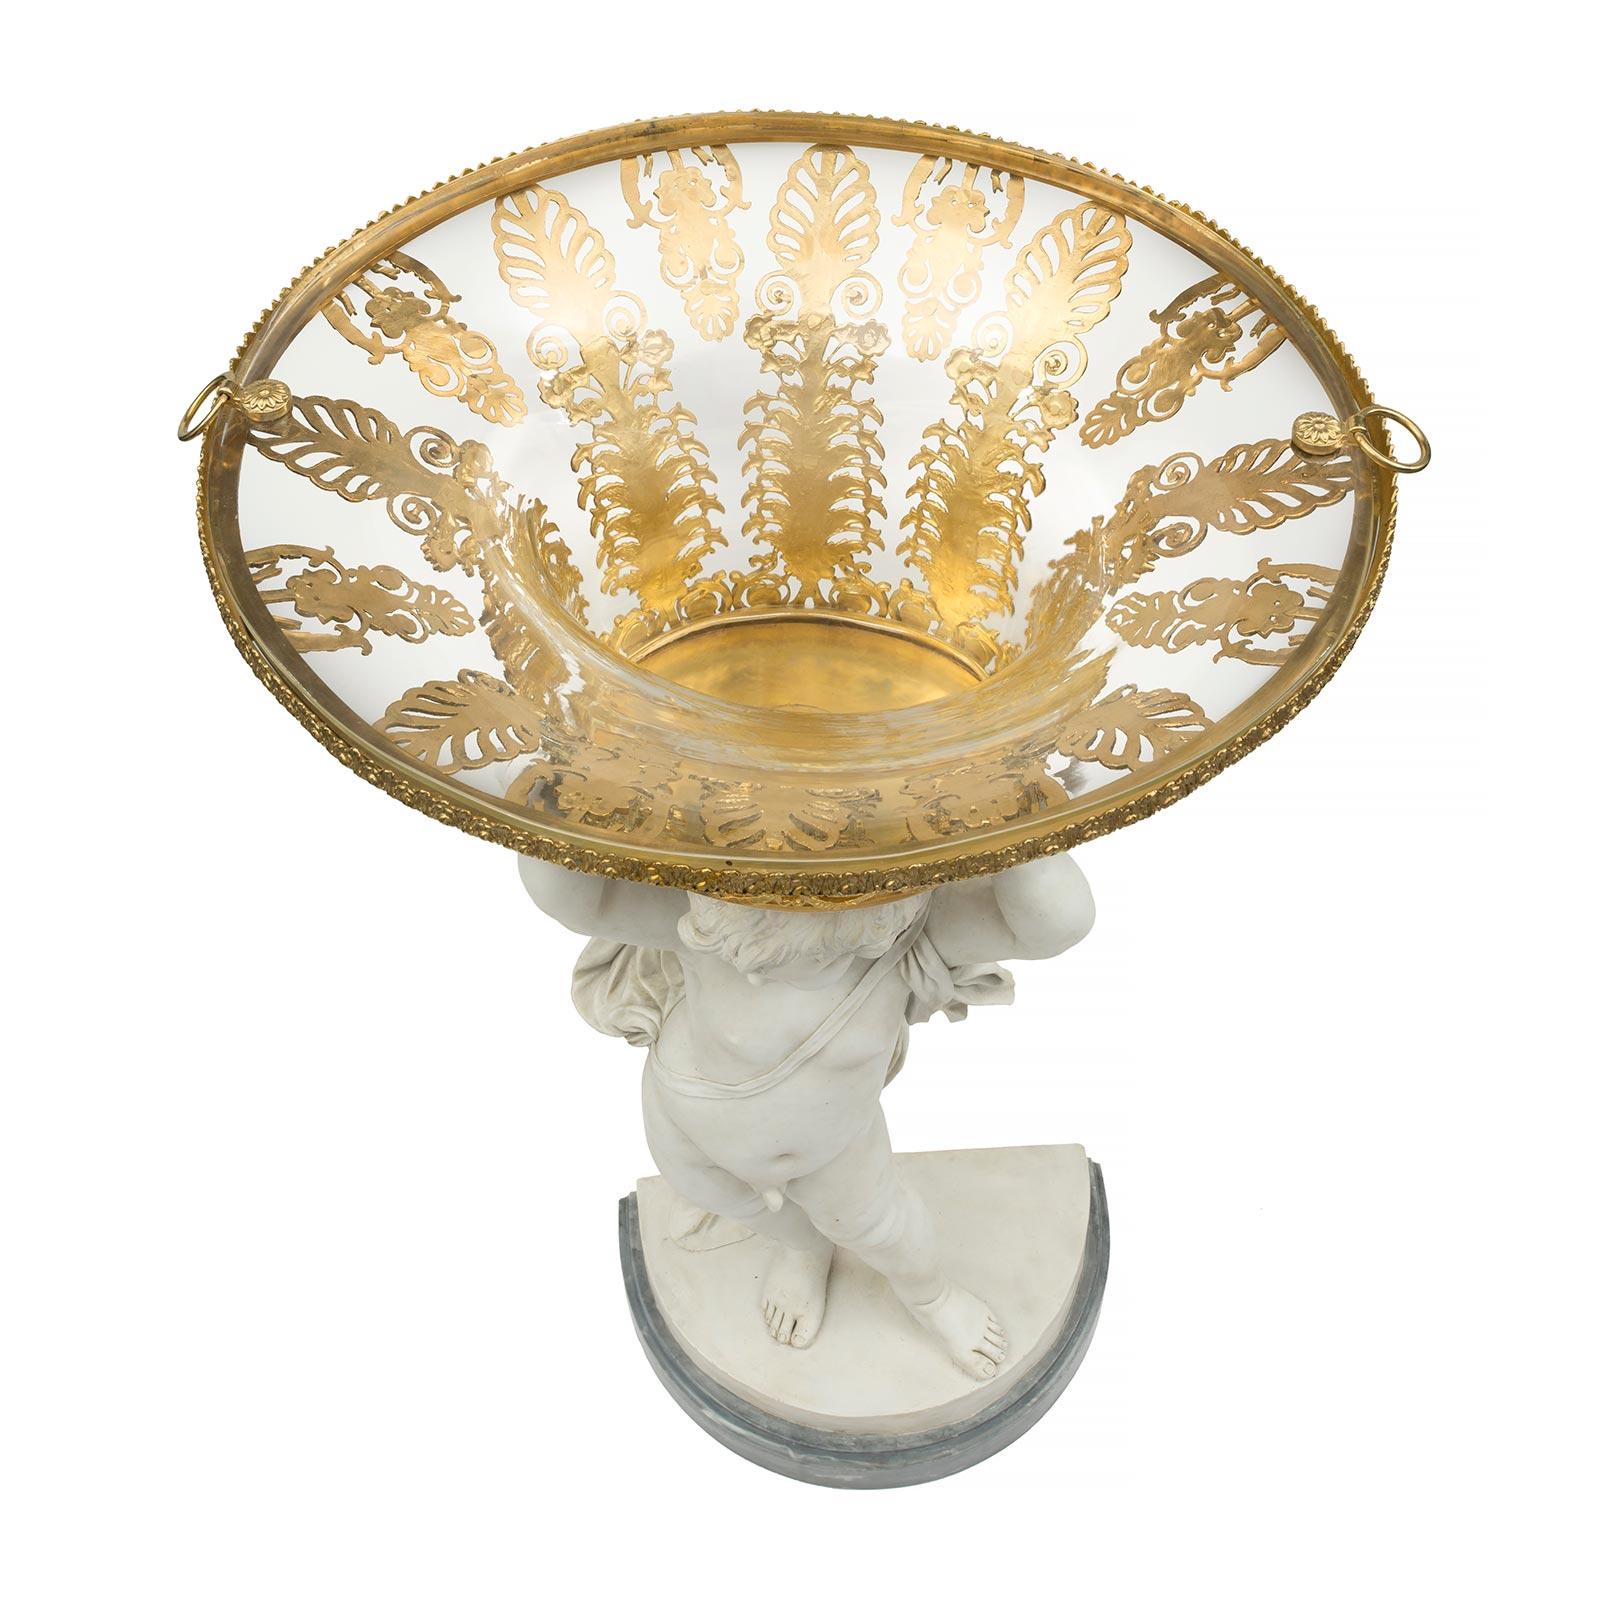 A very elegant and unique French 19th century Louis XVI st. Biscuit de Sèvres porcelain, ormolu and crystal centerpiece signed Louis-Simon Boizot. The centerpiece is raised by a thick demi lune Gris St. Anne marble base with a concave top border.